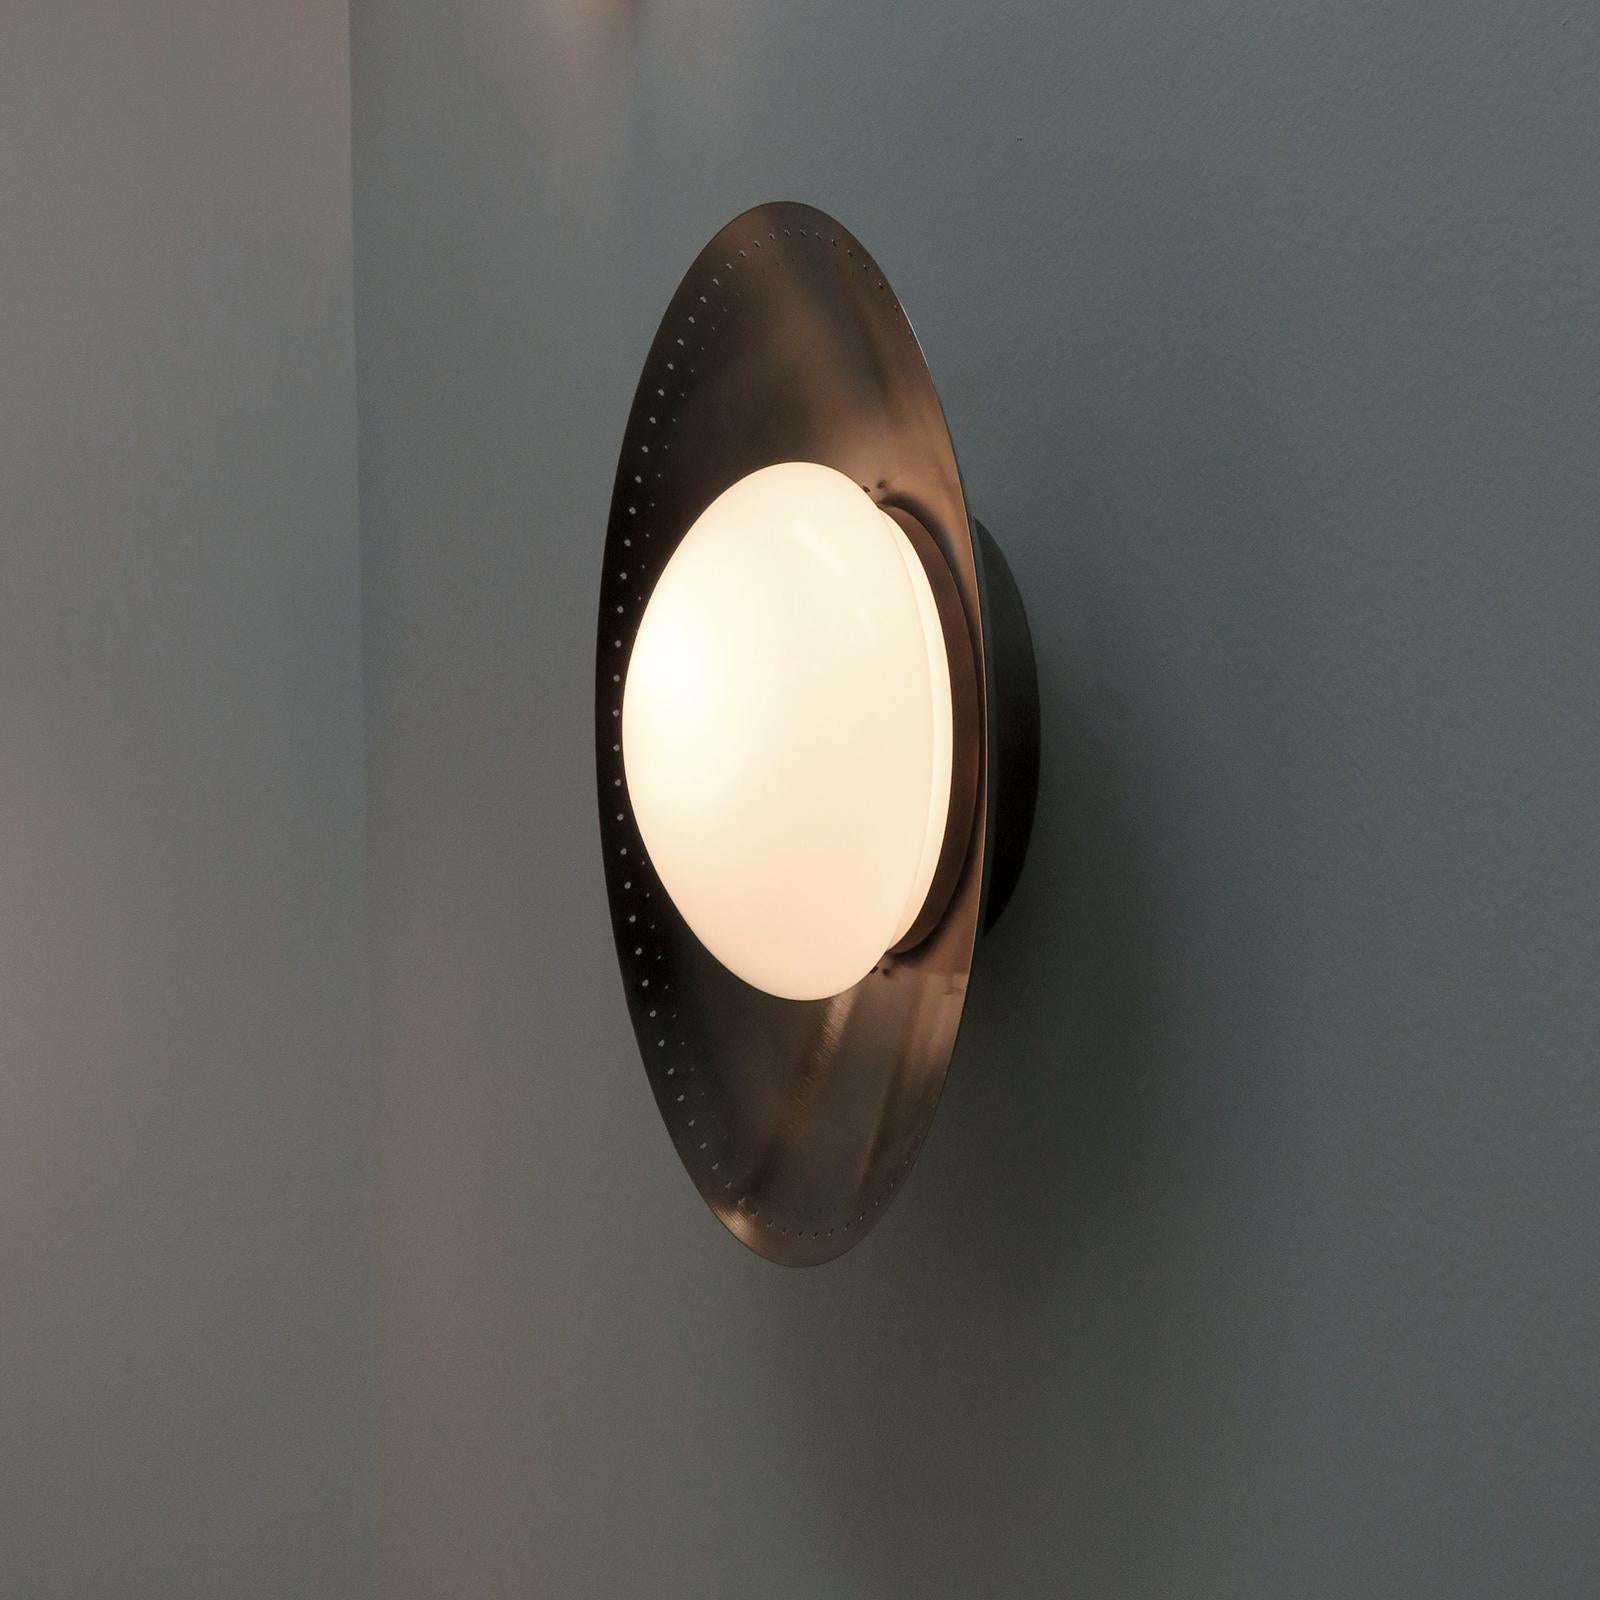 Silver Maine-18 Wall Light by Gallery L7 For Sale 1